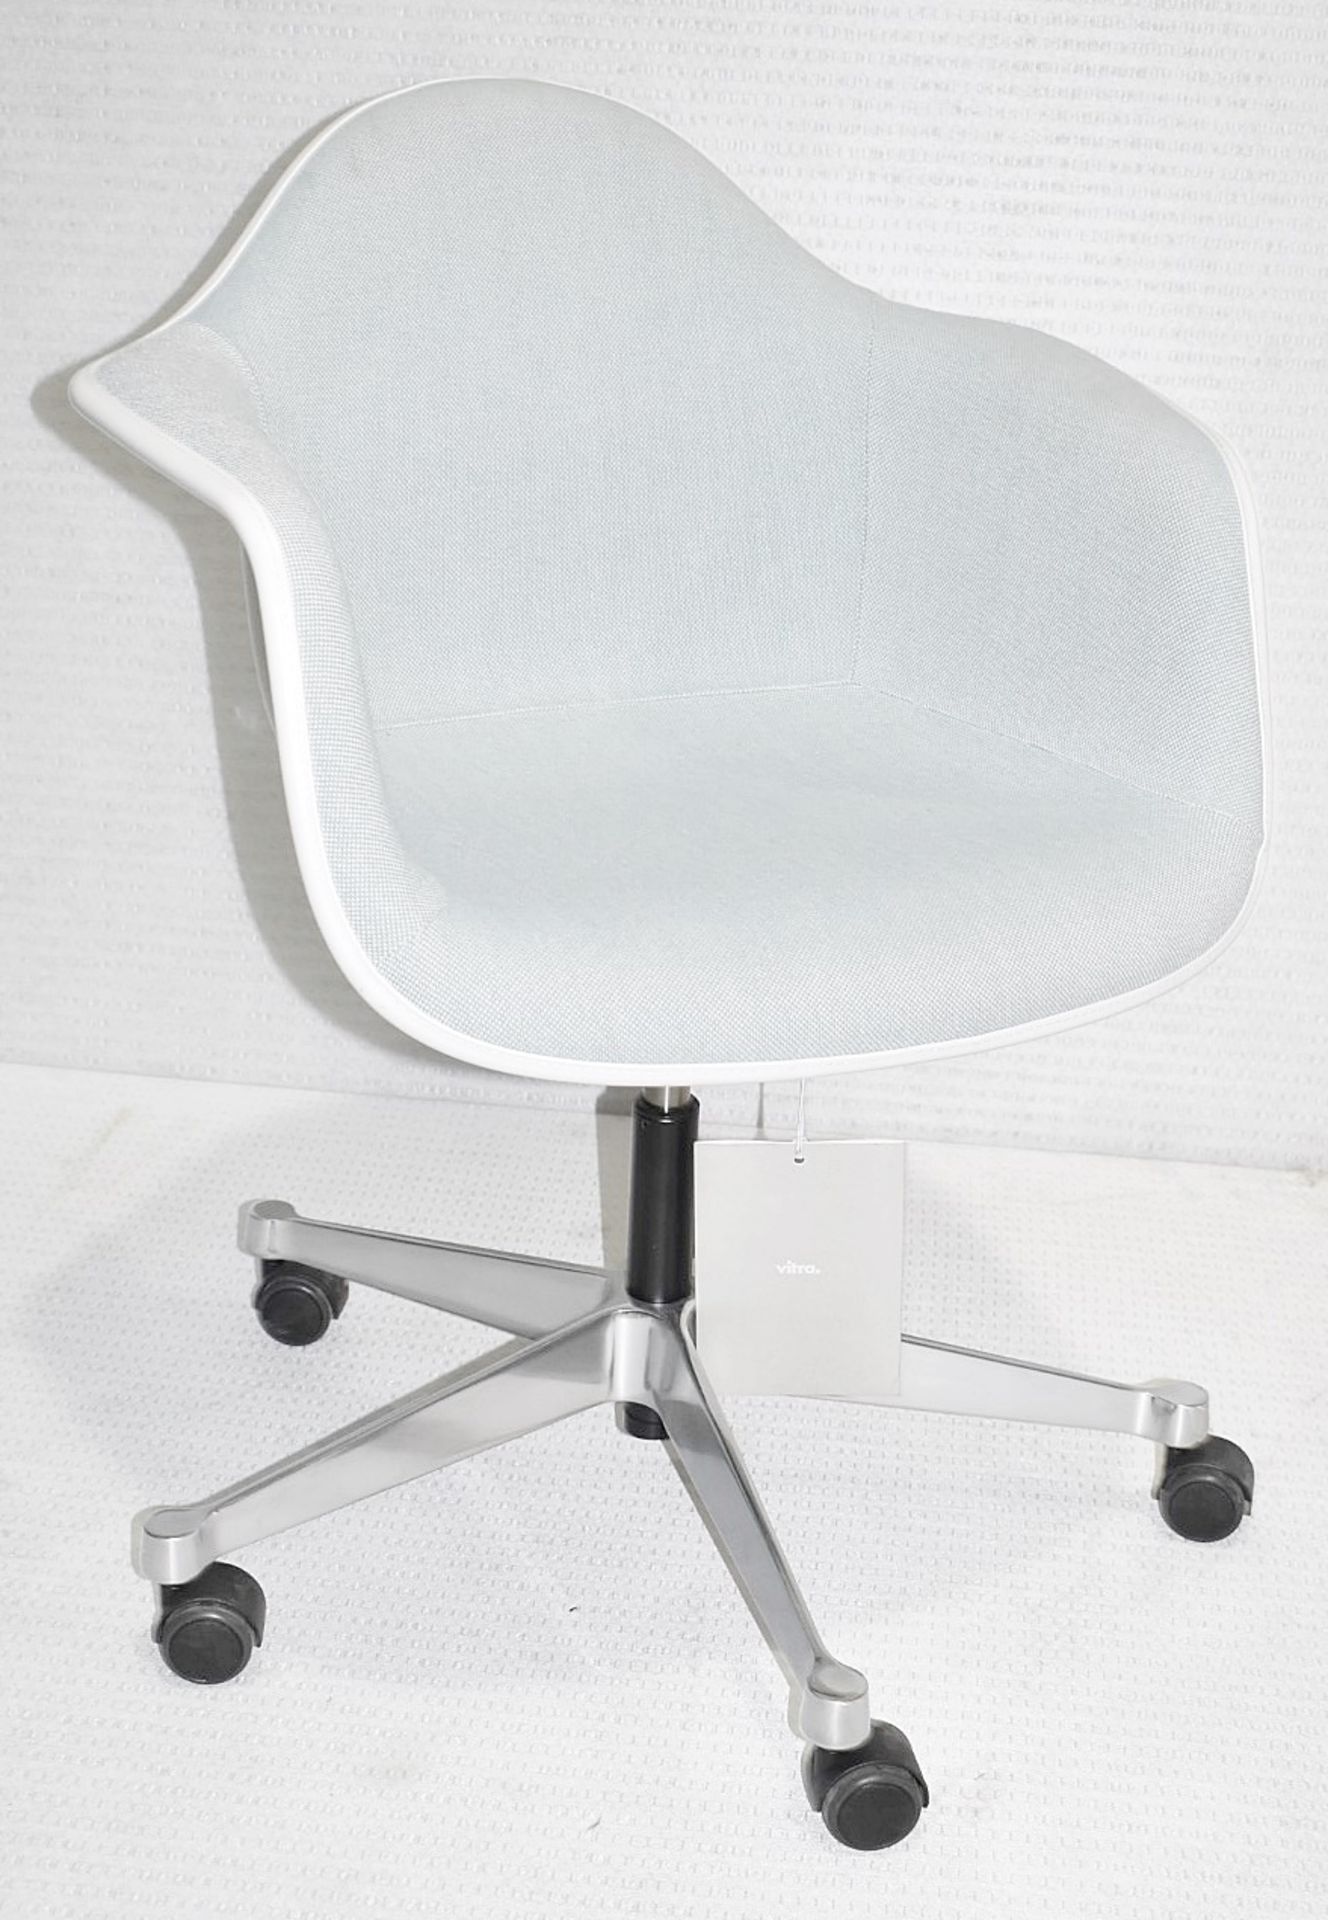 1 x VITRA / EAMES 'DAW Plastic' Designer Upholstered Armchair with Castor Base - RRP £985.00